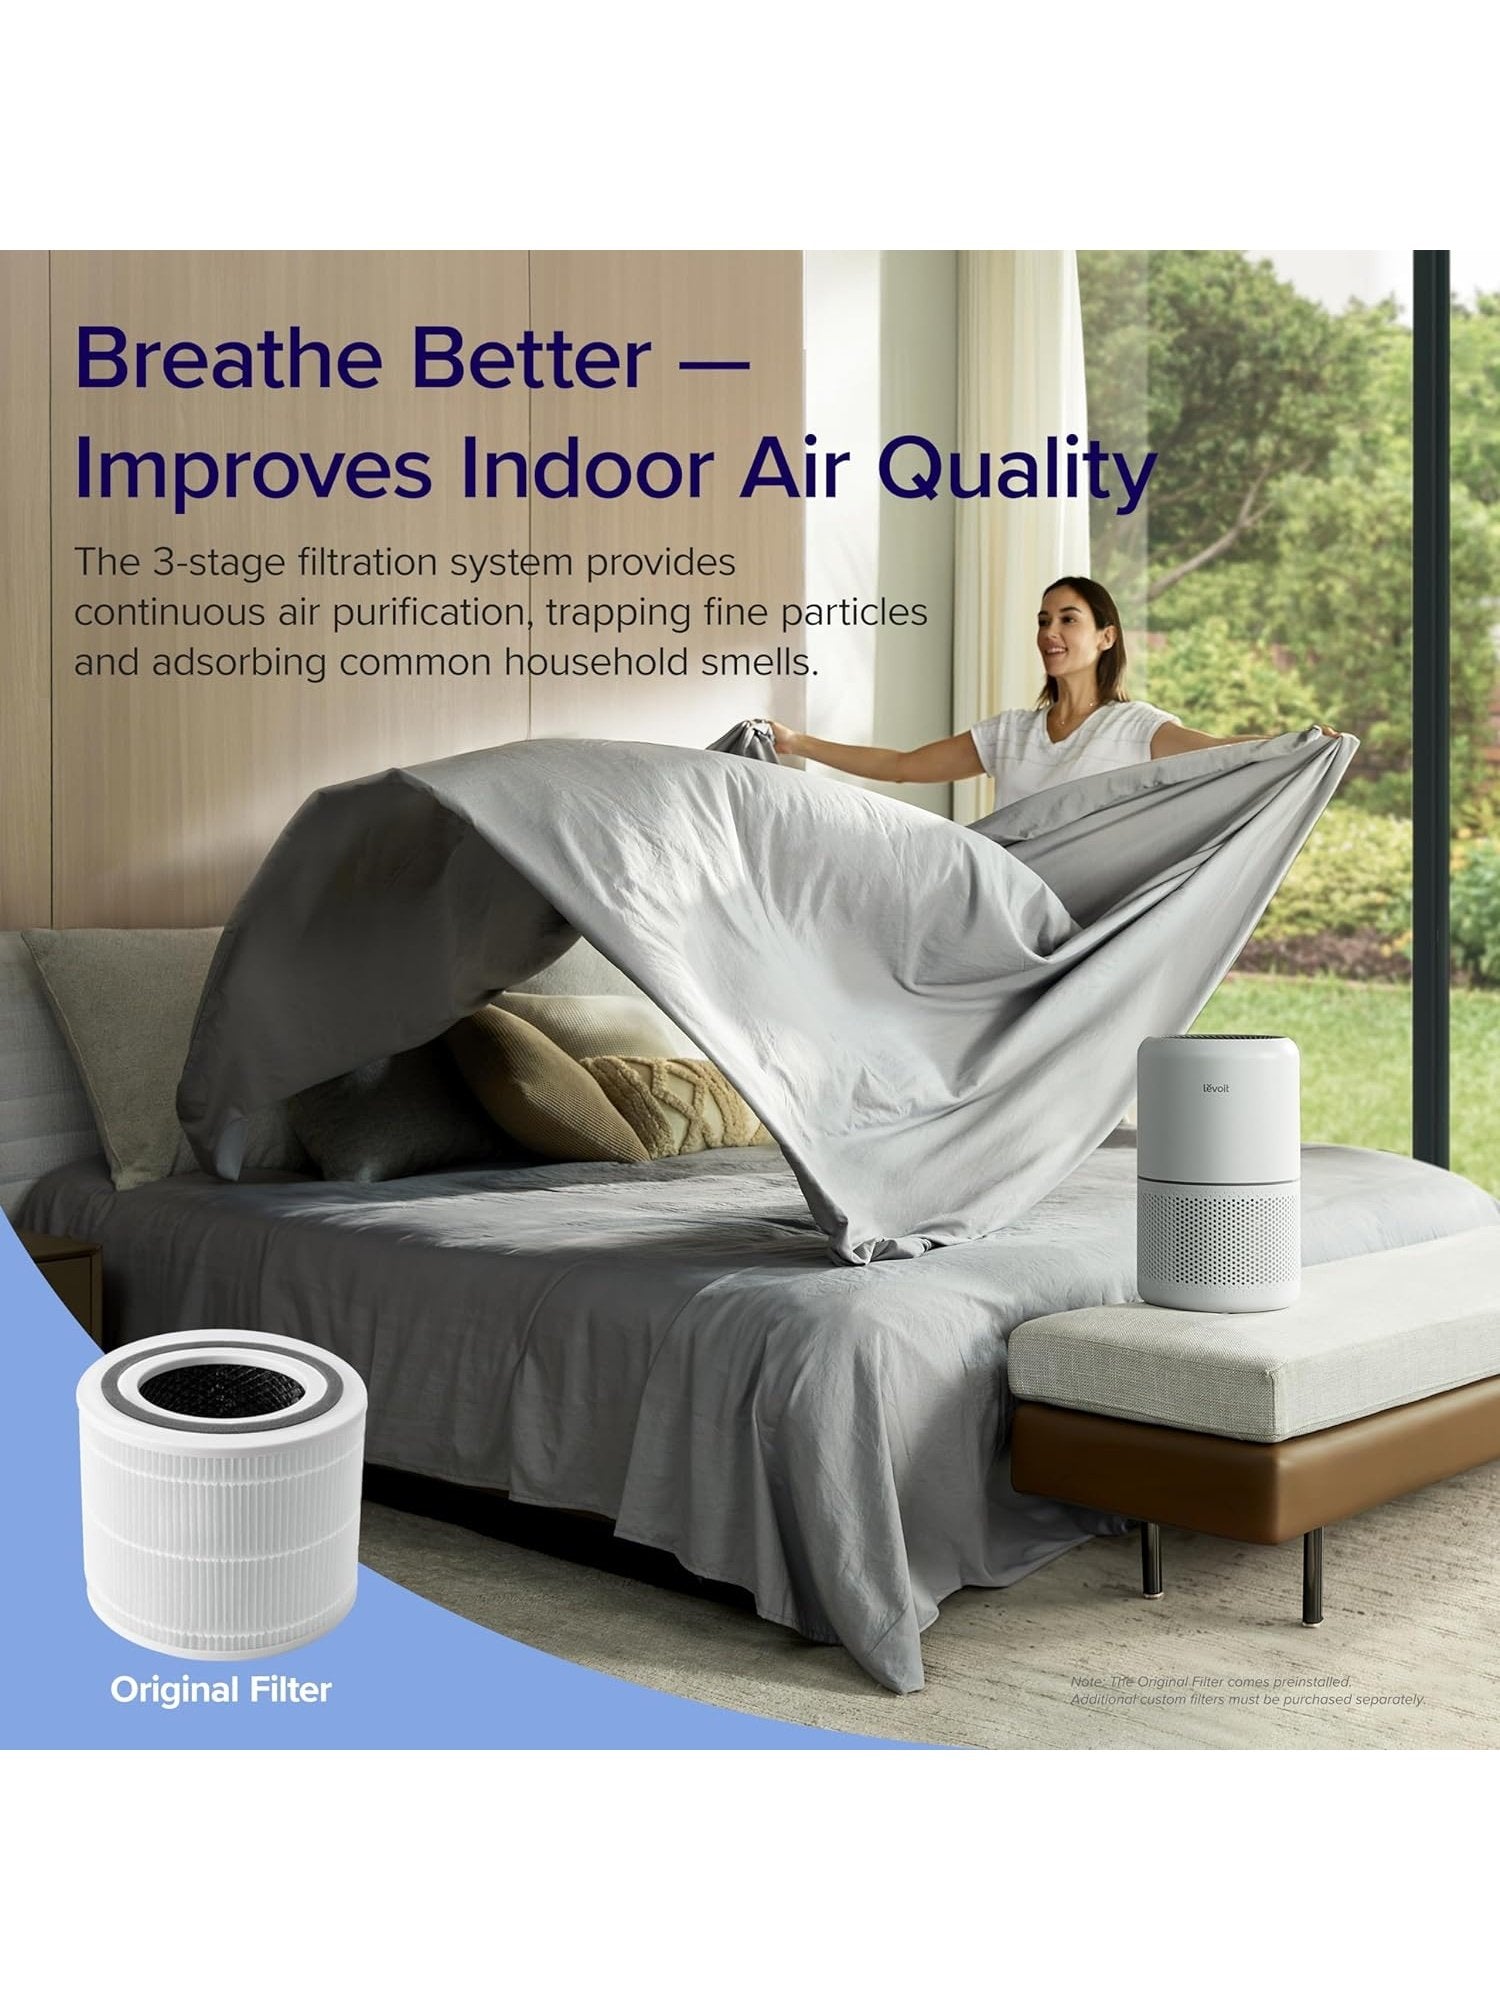 LEVOIT Air Purifier for Home Allergies Pets Hair in Bedroom, Covers Up to 1095 ft² by 45W High Torque Motor, 3-in-1 Filter with HEPA sleep mode, Remove Dust Smoke Pollutants Odor, Core300-P, White